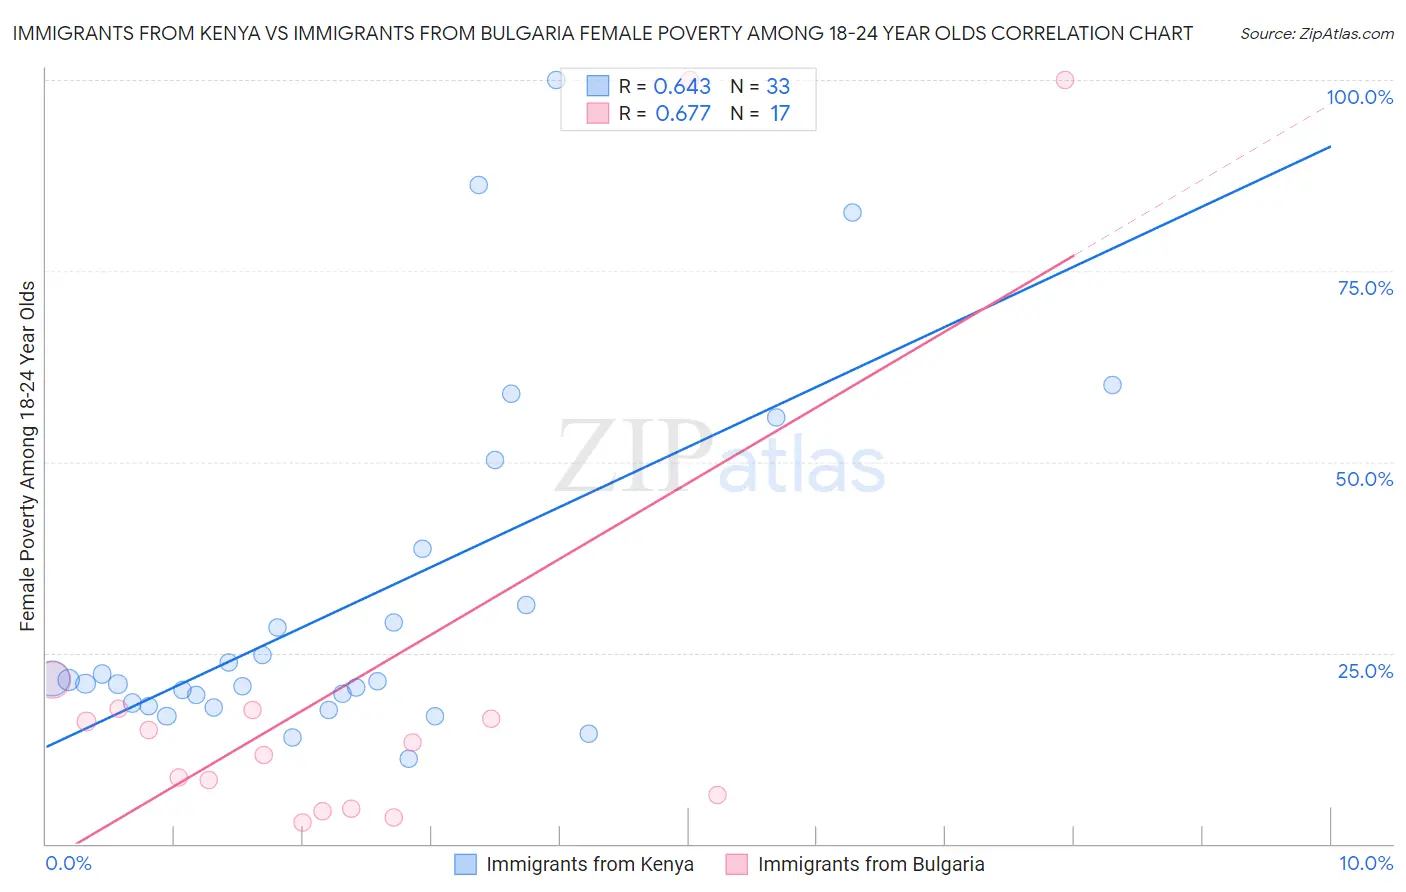 Immigrants from Kenya vs Immigrants from Bulgaria Female Poverty Among 18-24 Year Olds